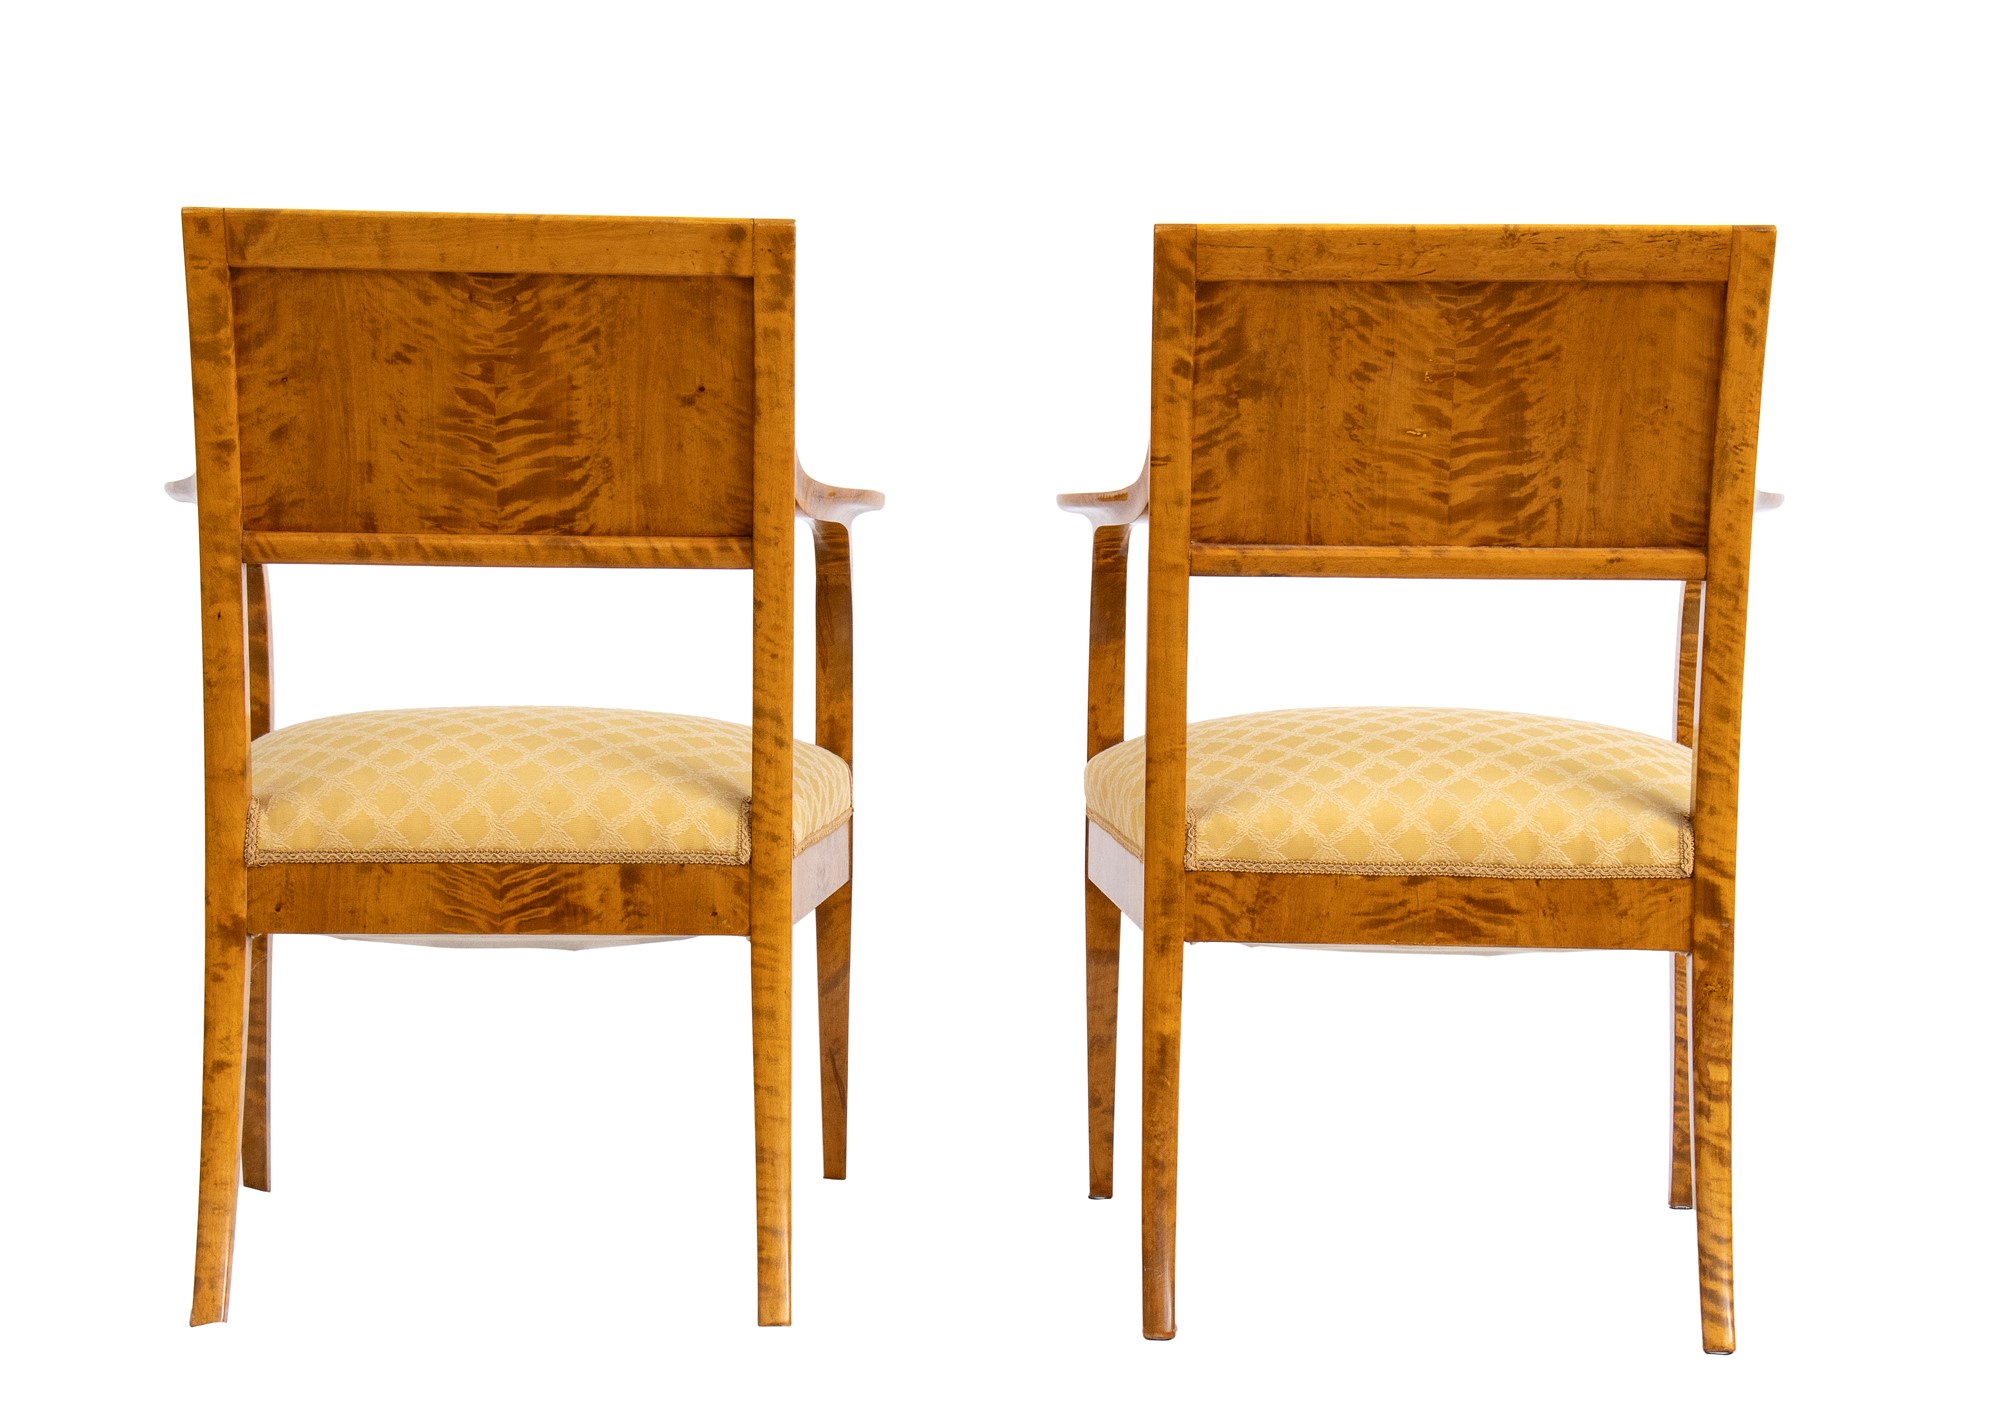 Pair of chairs Biedermeier with back carved in geometric decor with ebonized woods. - Image 12 of 19